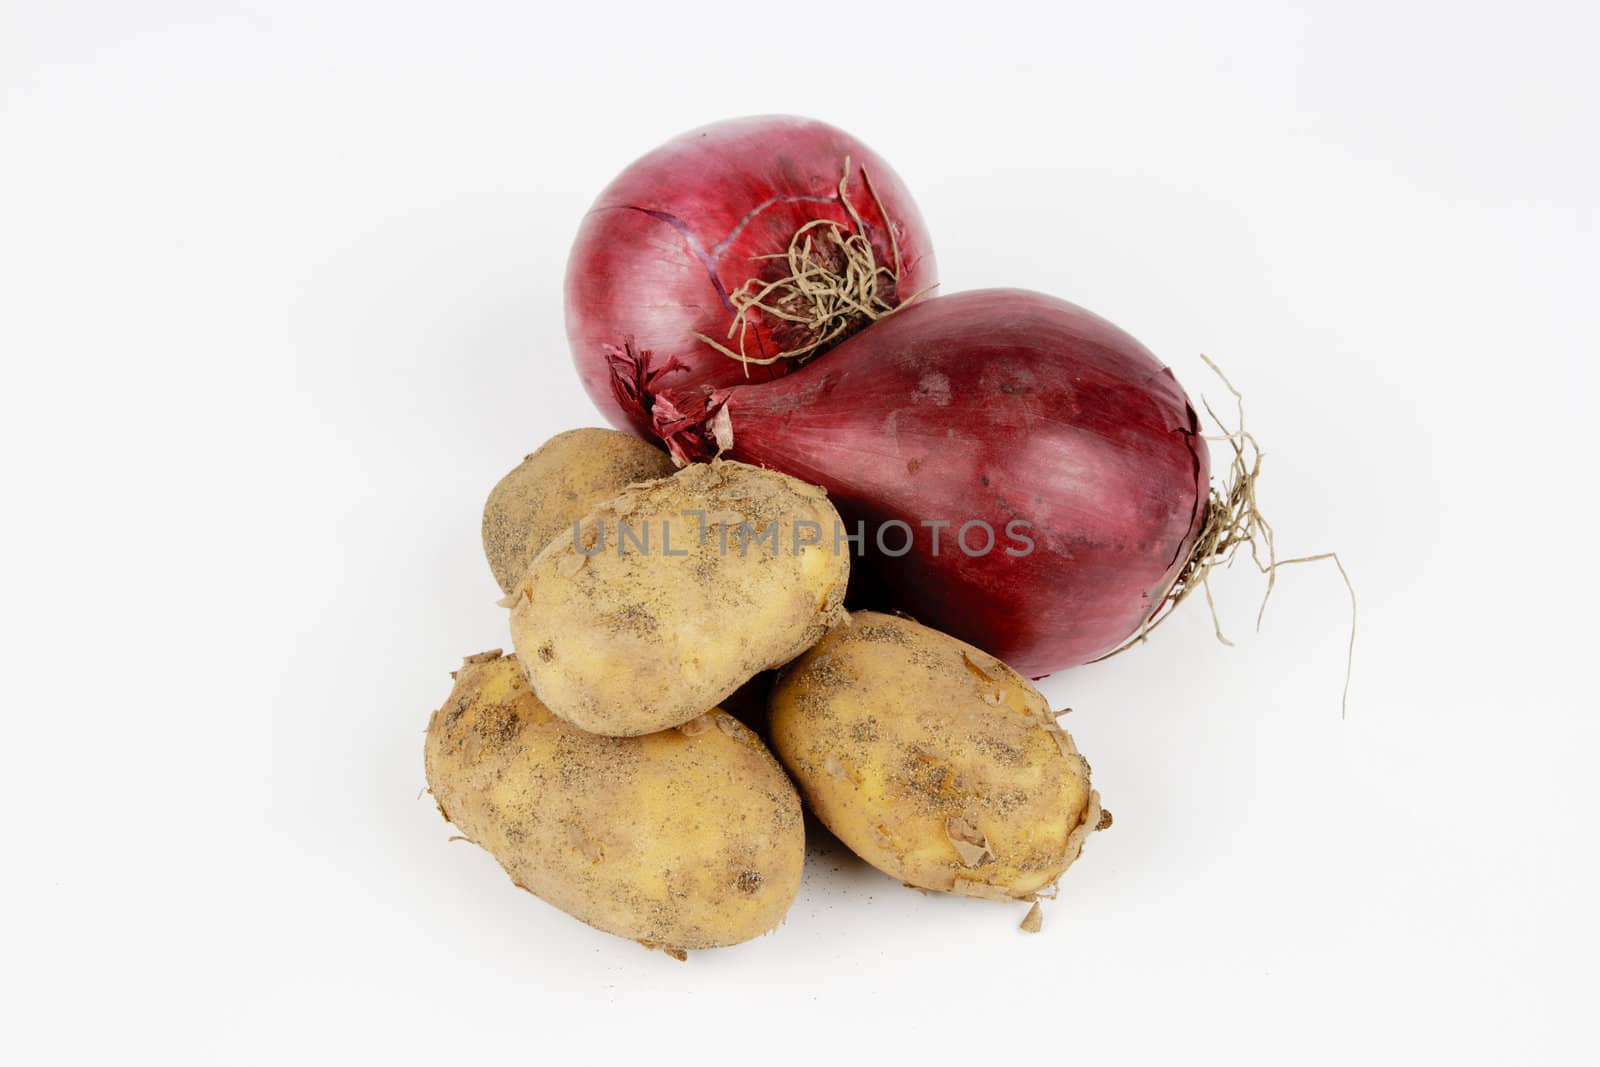 Two raw unpeeled red onions on a reflective white backgrounds